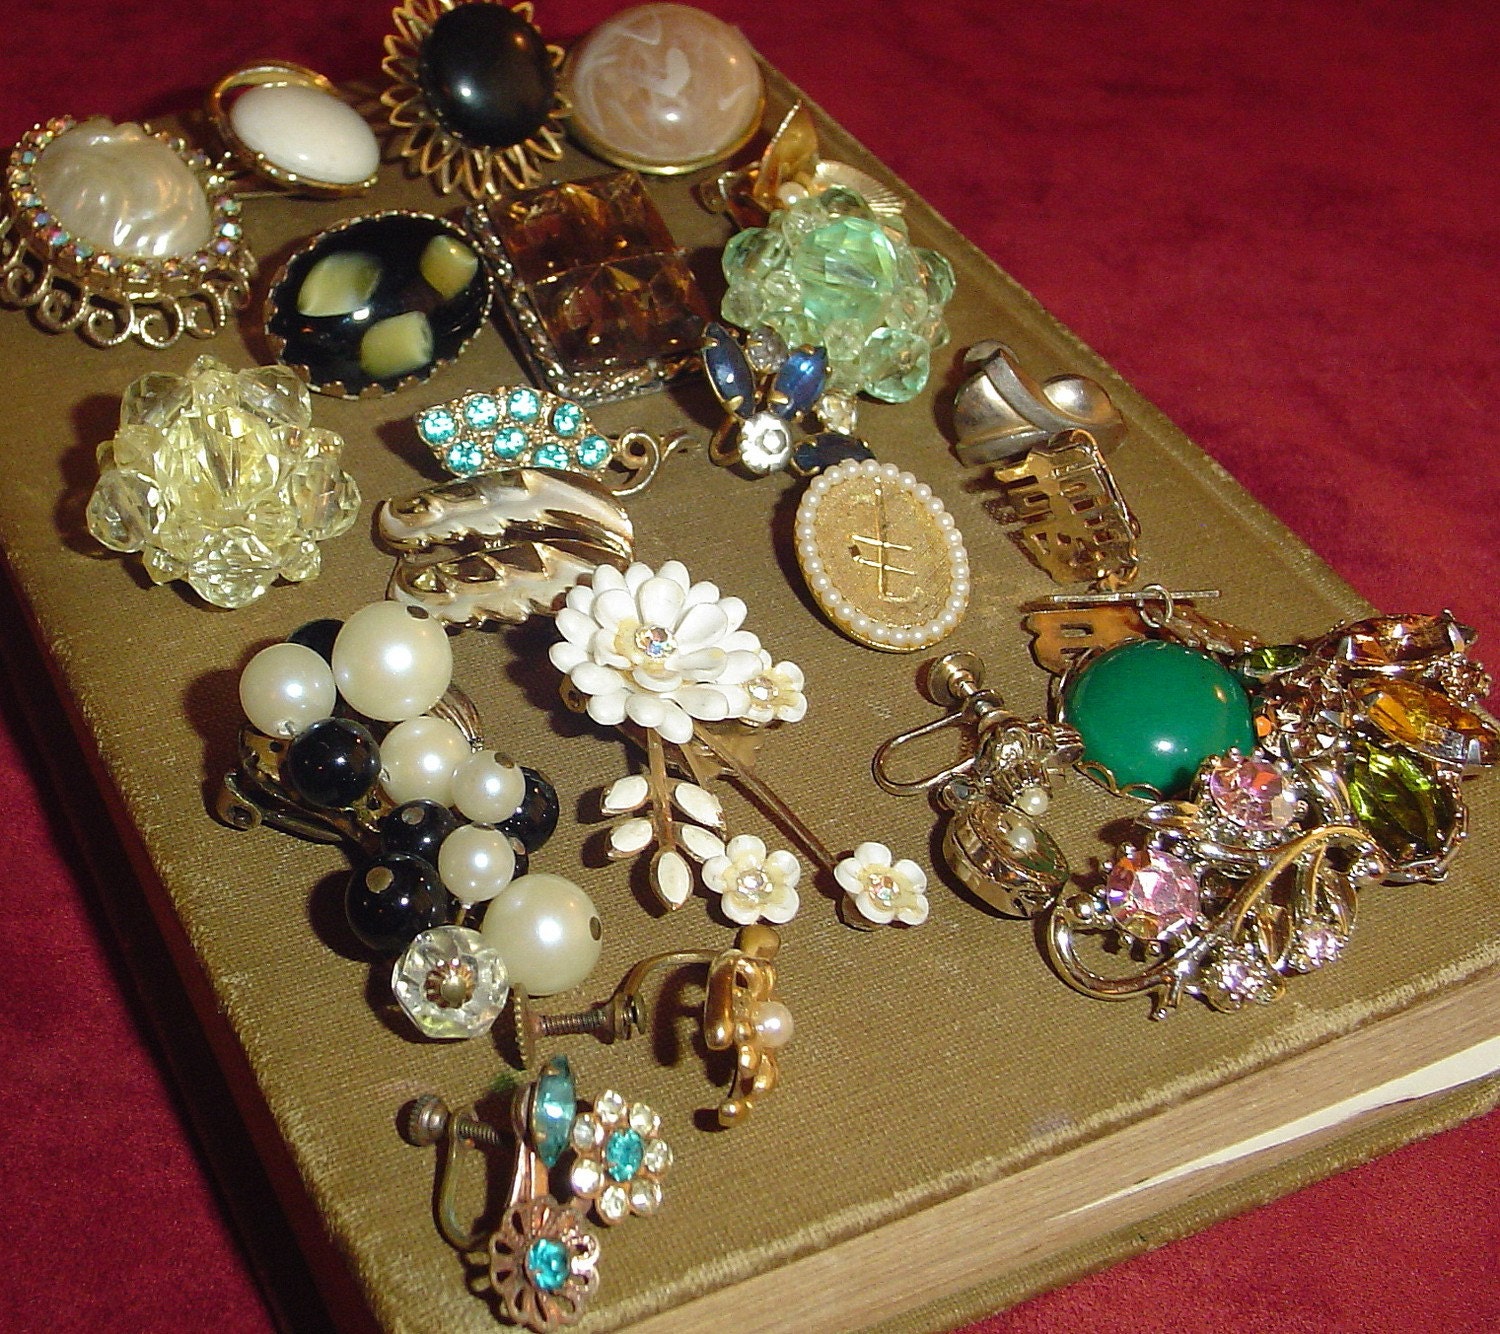 Lot of 22 vintage single earrings for your repurposing happiness